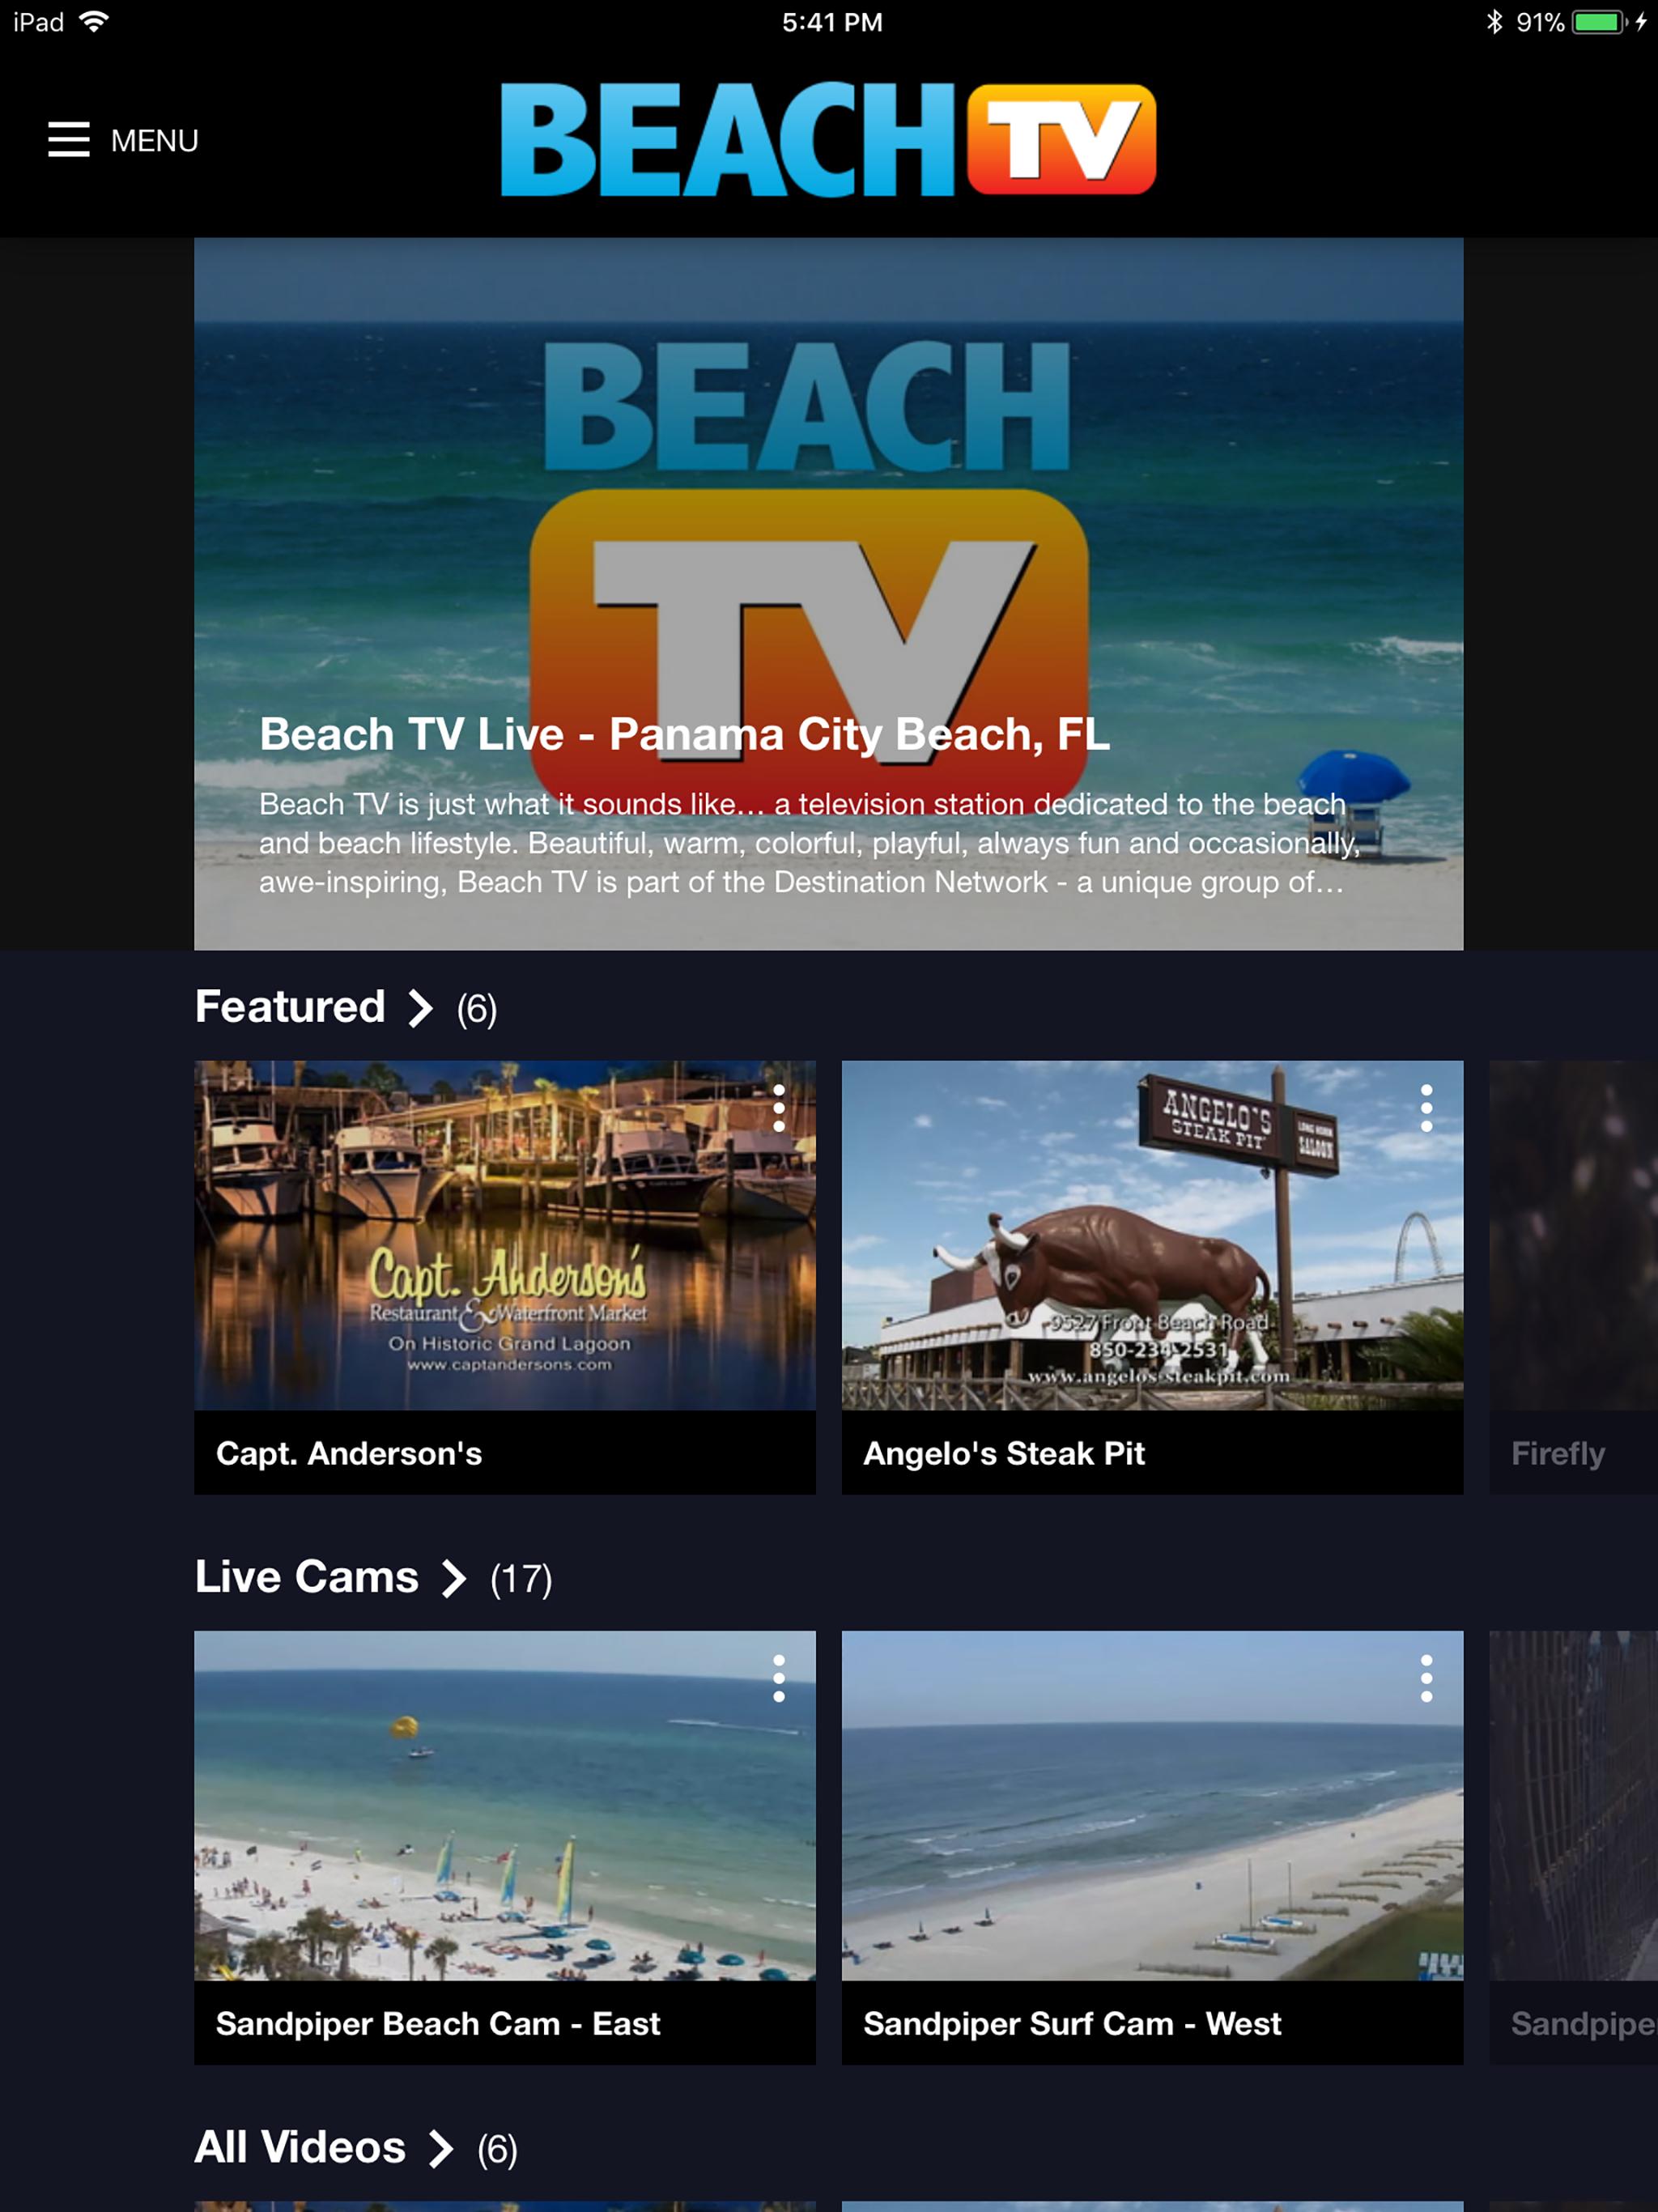 Beach TV - Panama City Beach for Android - APK Download